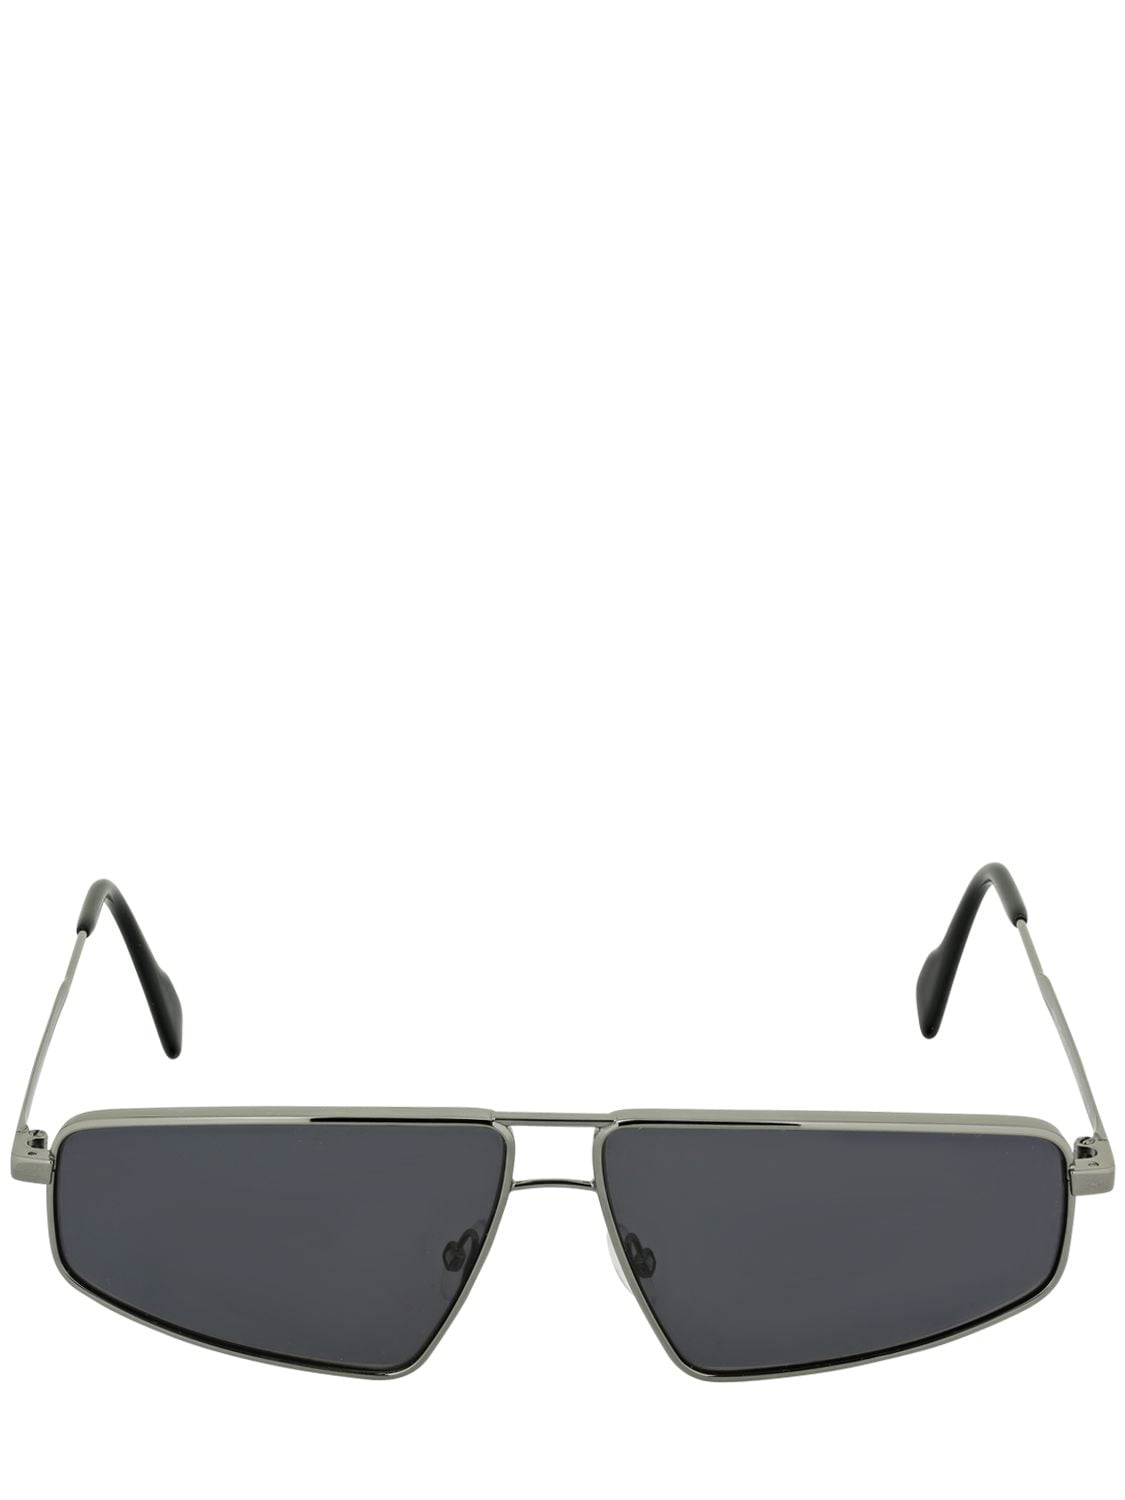 Andy Wolf Sterling Squared Metal Sunglasses In Silver,grey